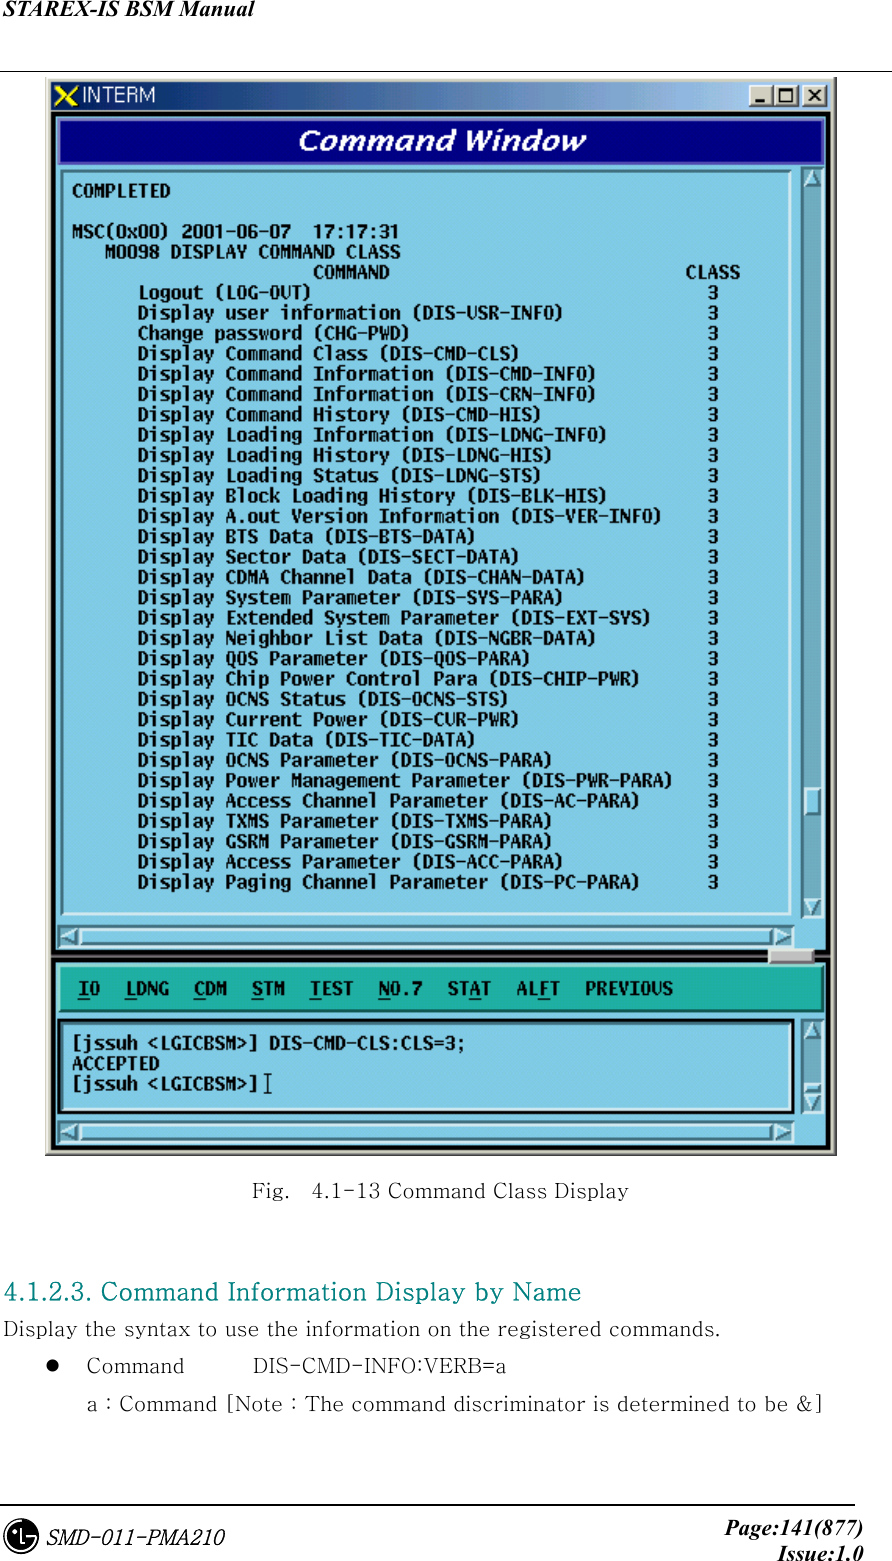 STAREX-IS BSM Manual     Page:141(877)Issue:1.0SMD-011-PMA210  Fig.    4.1-13 Command Class Display  4.1.2.3. Command Information Display by Name Display the syntax to use the information on the registered commands.     Command  DIS-CMD-INFO:VERB=a   a : Command [Note : The command discriminator is determined to be &amp;]  